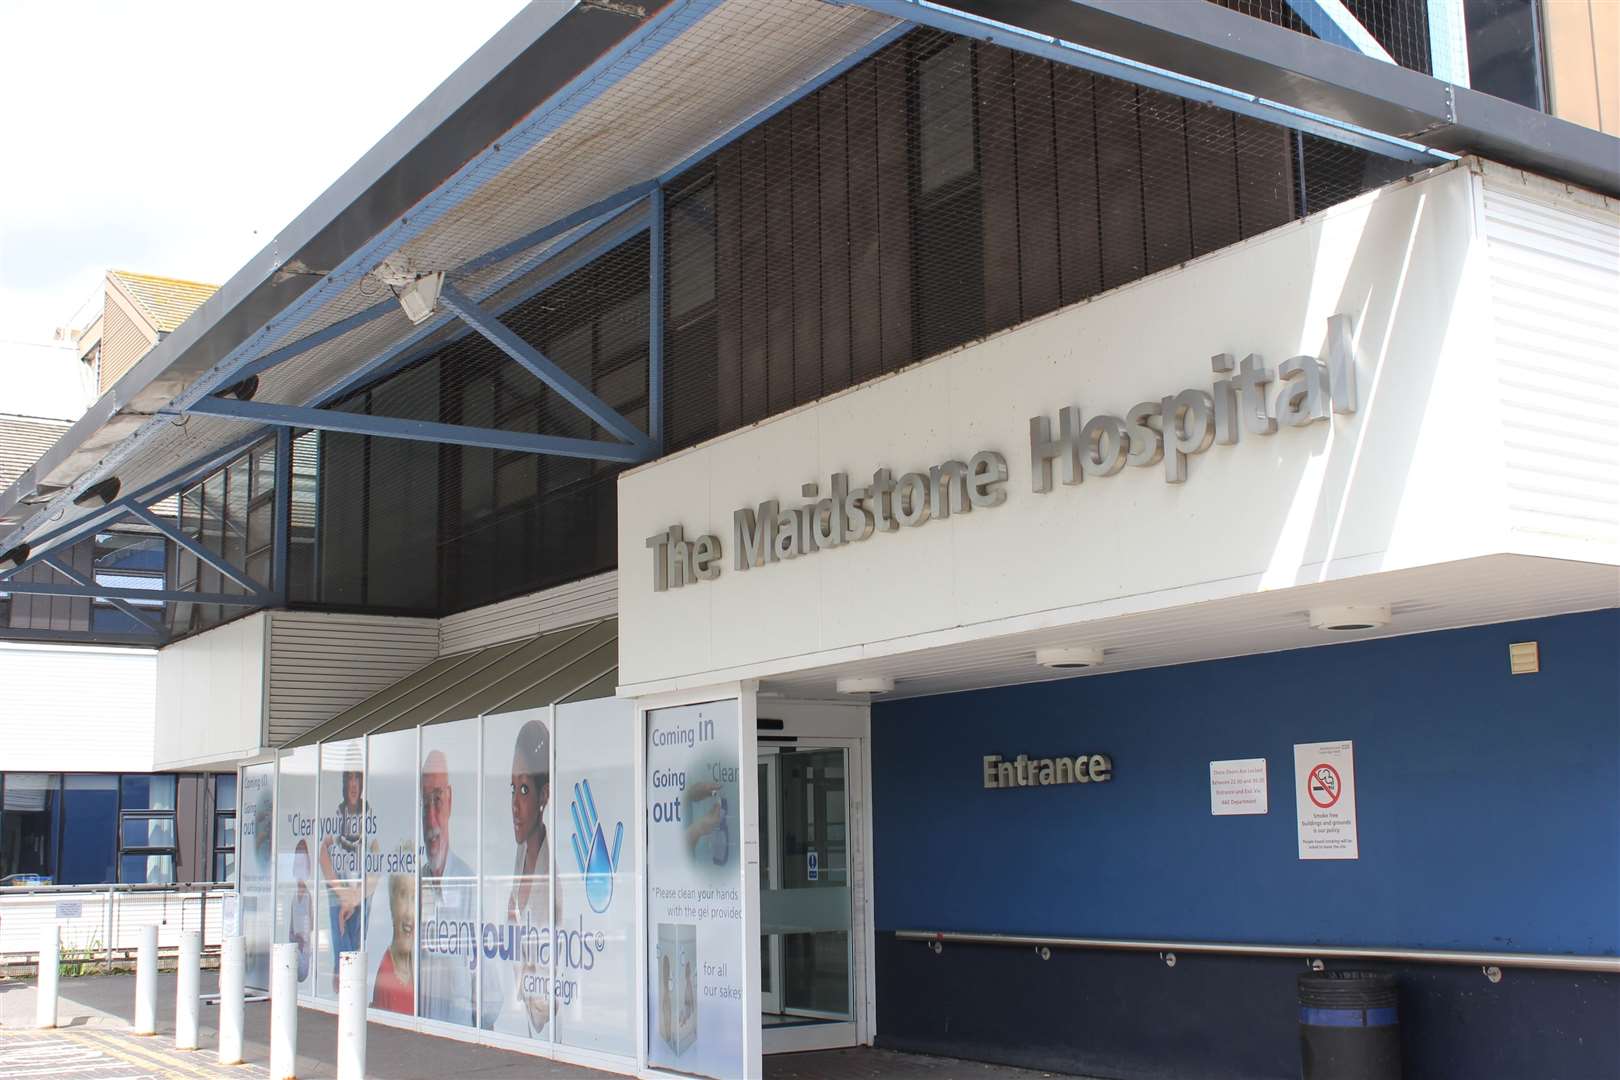 Staff shortages led to an elderly patient being left on a trolley overnight